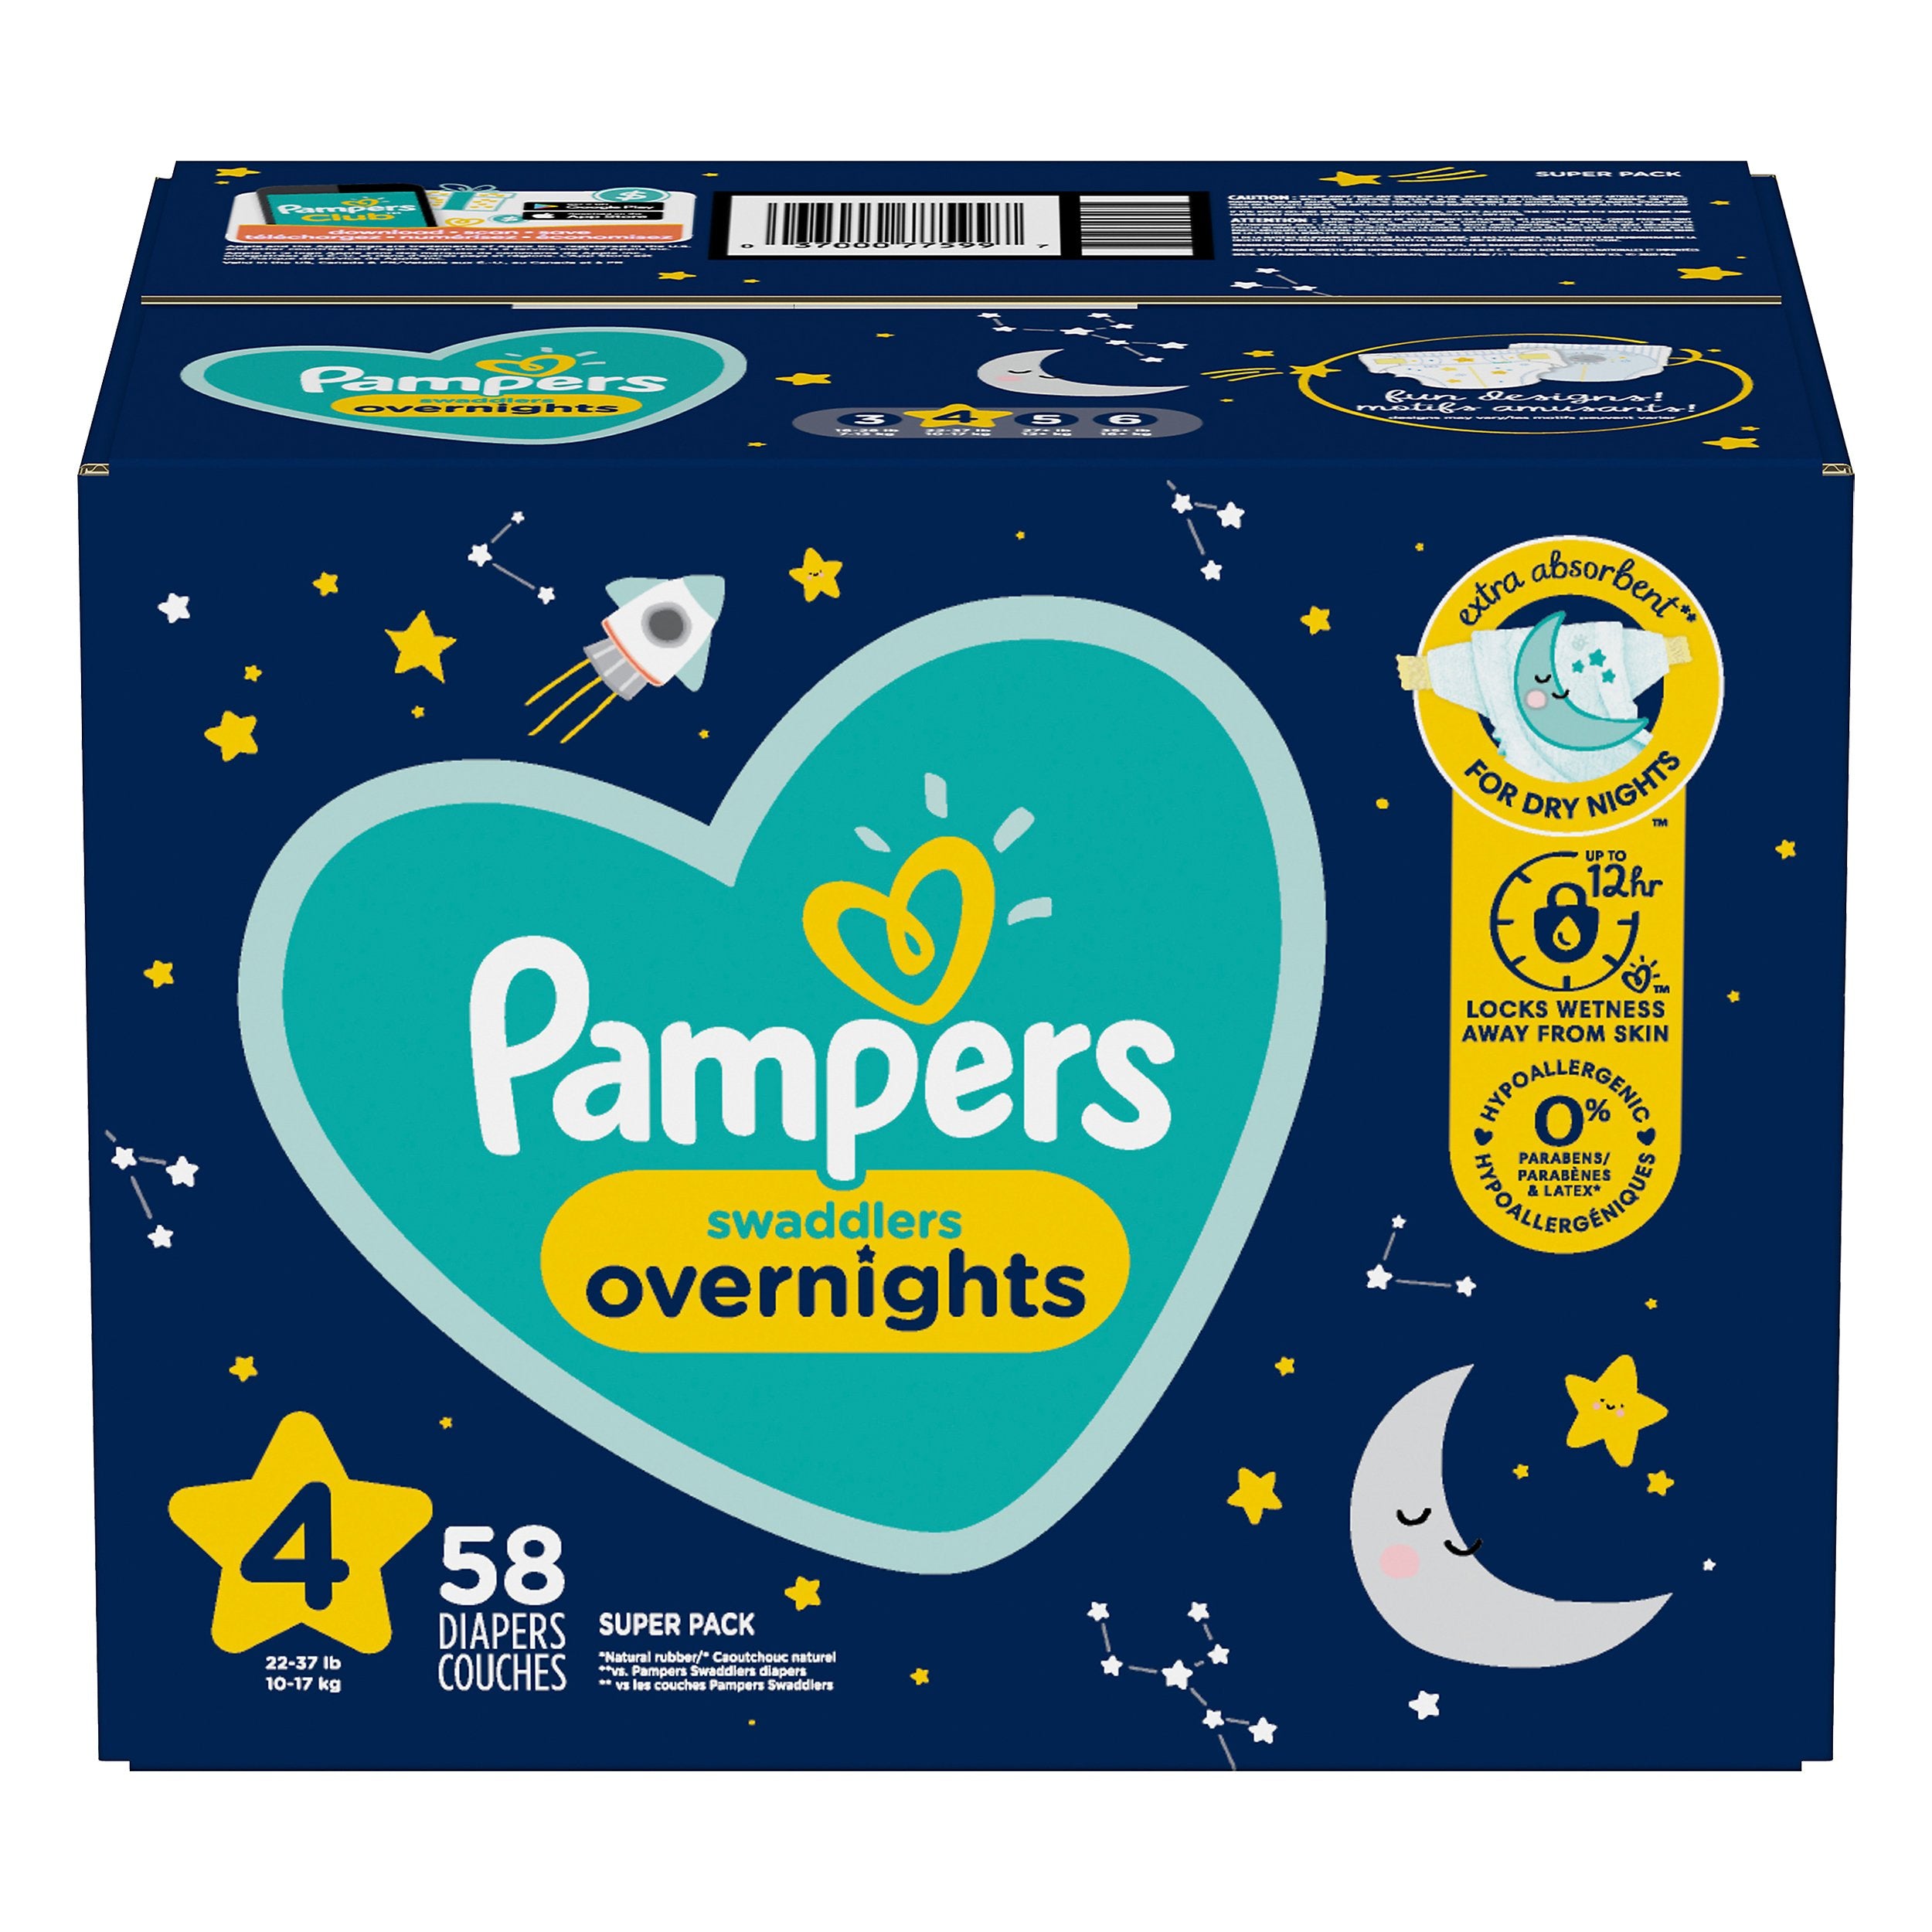 Pampers Diapers (22-37 Lb) Super Pack 58 CT Pack –, 47% OFF